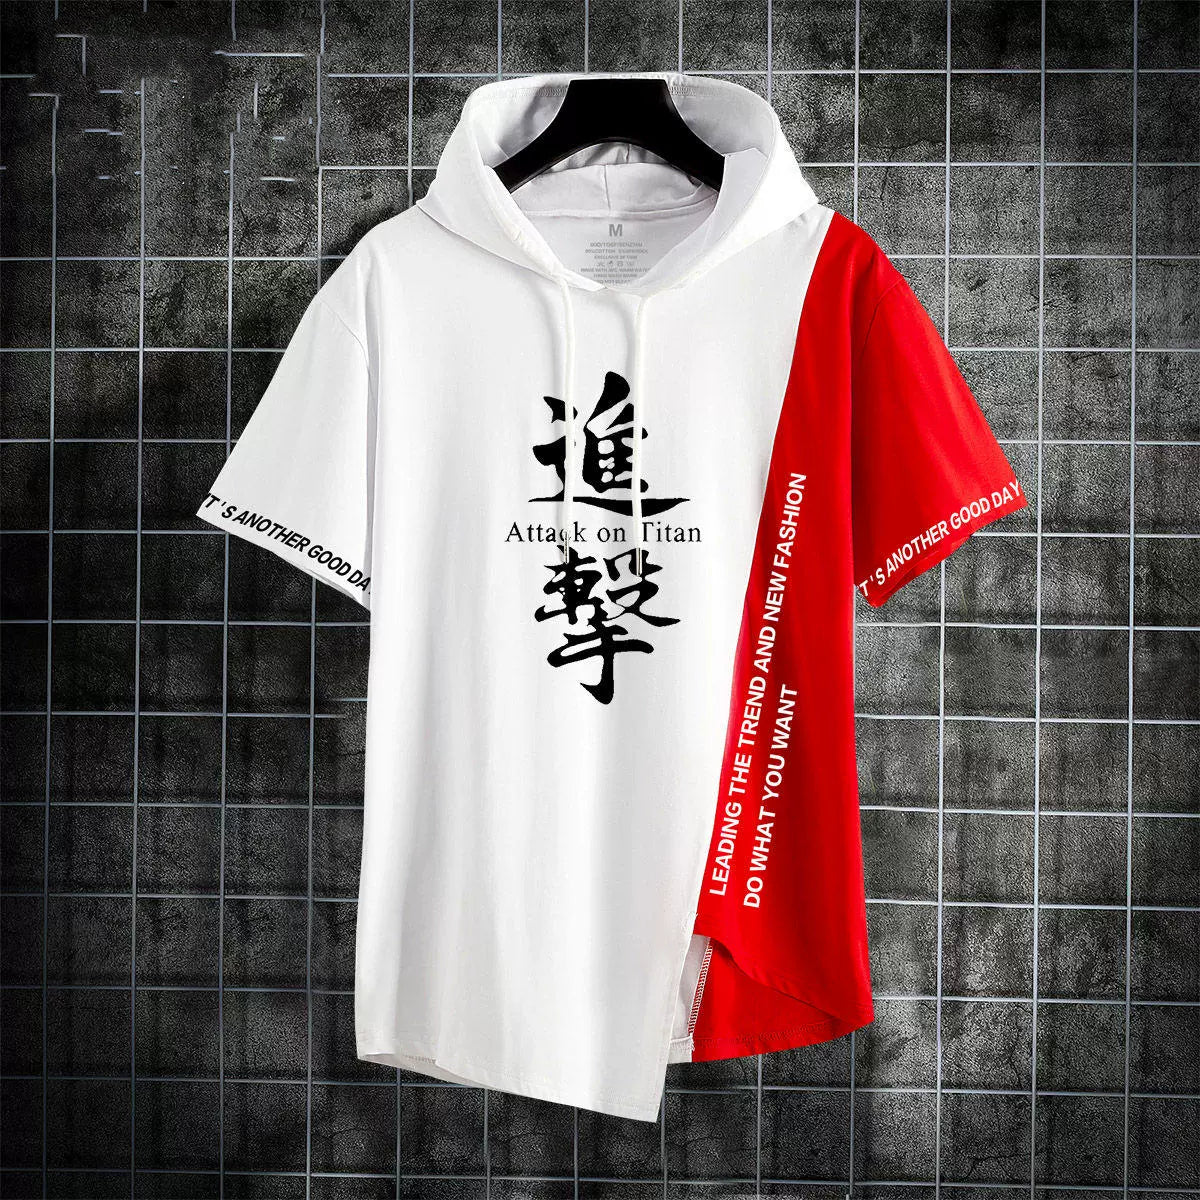 Attack on Titan <Wings of Liberty> Summer T-shirt Loose Hoodie